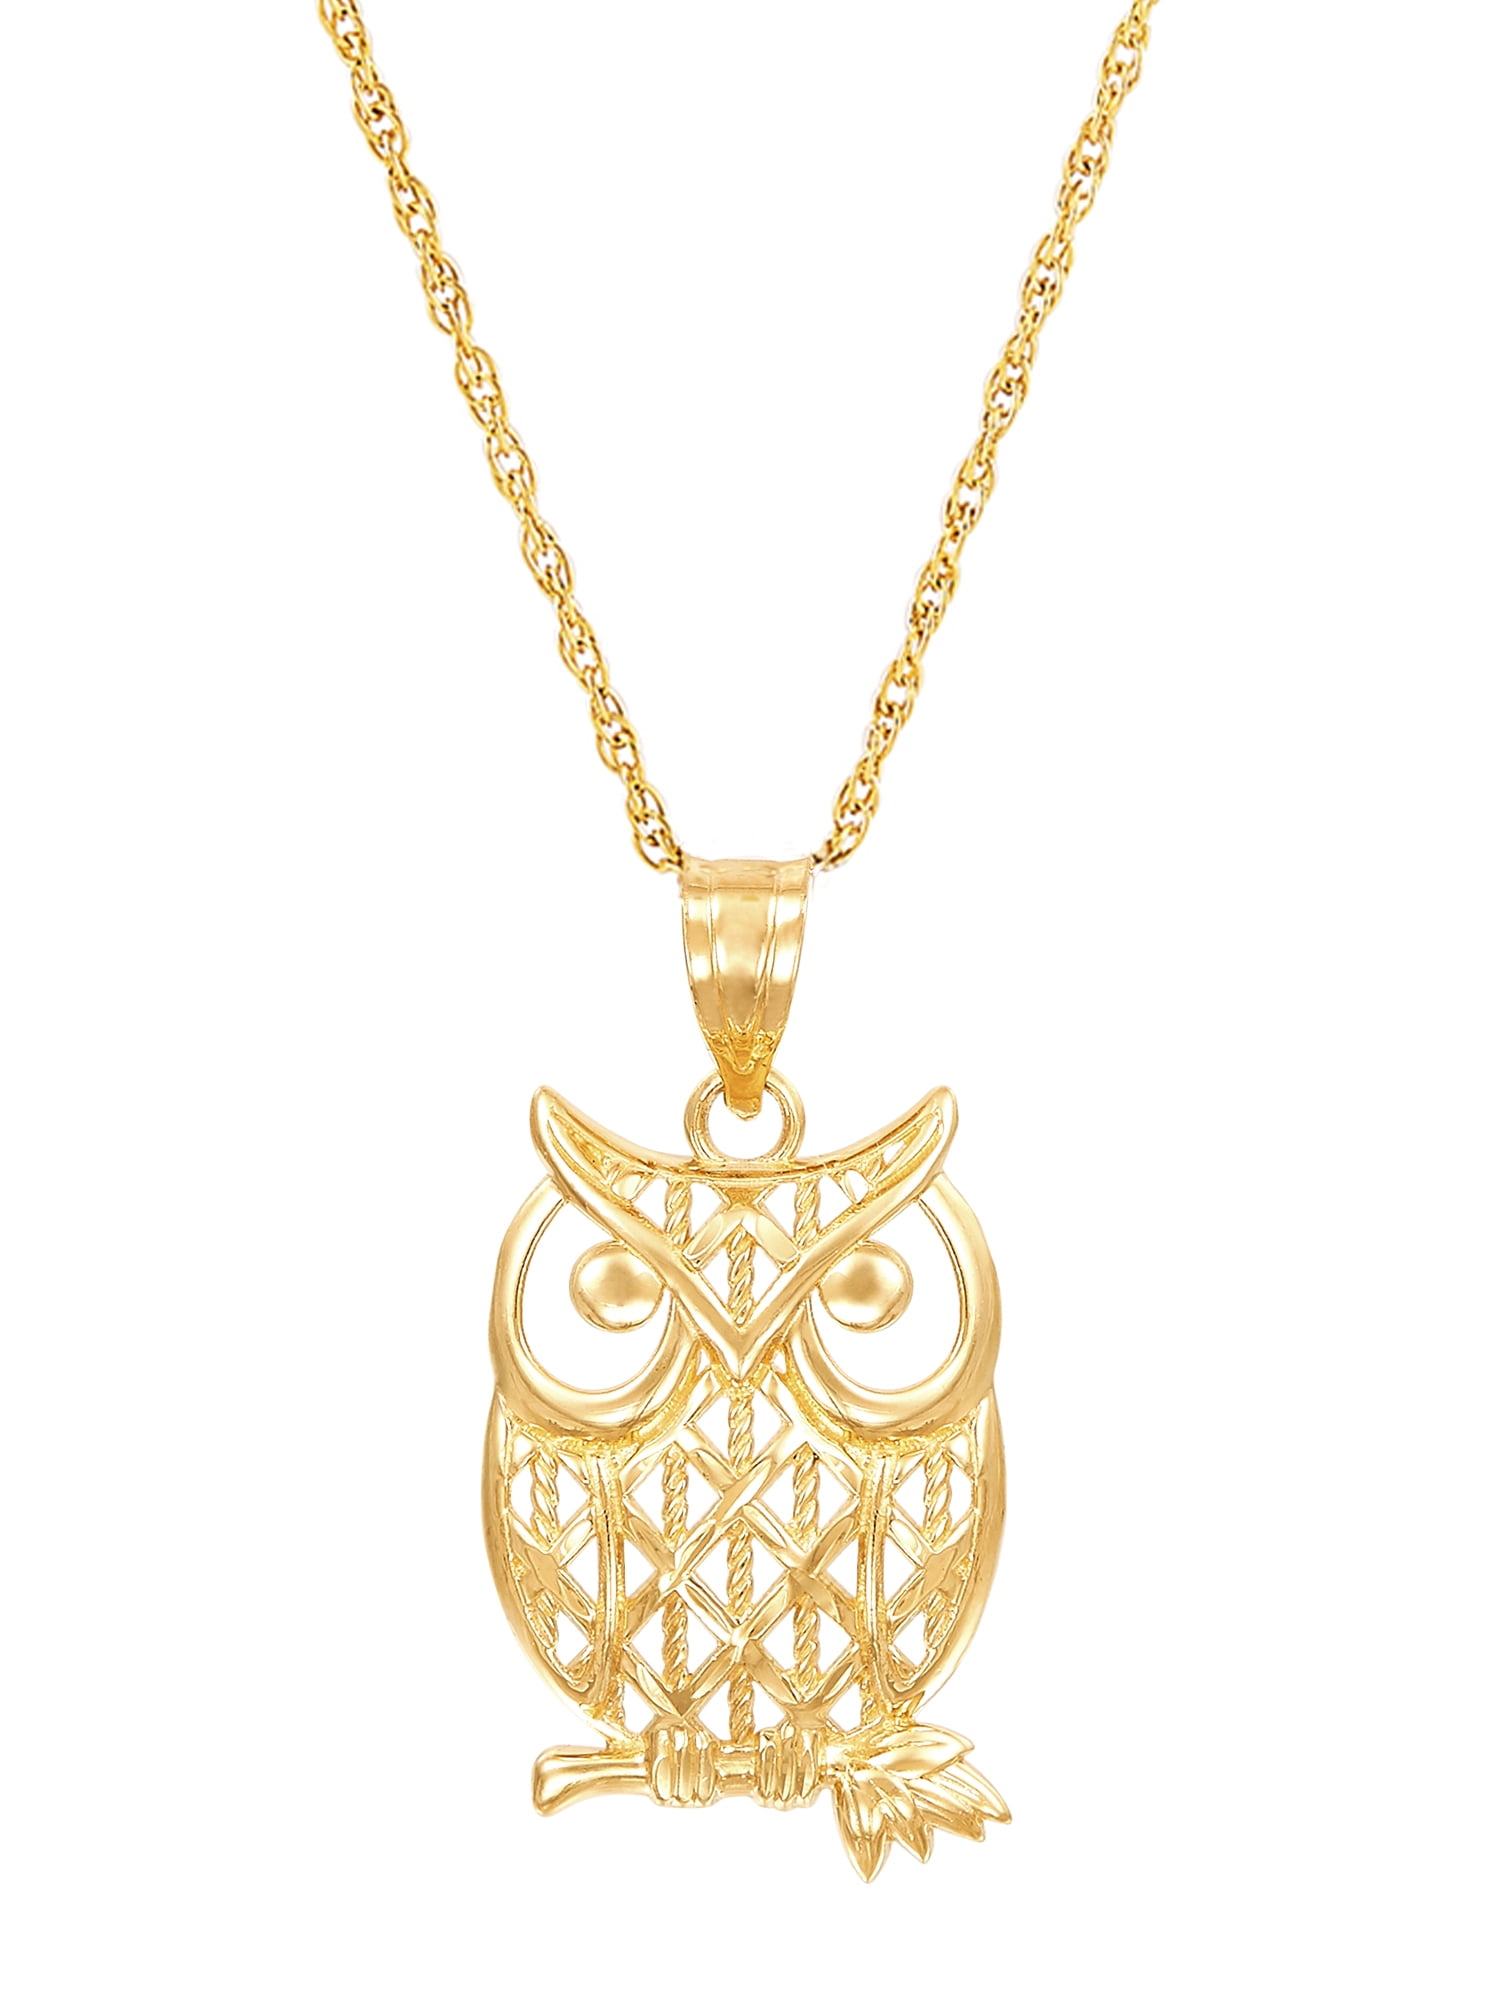 14K Solid Yellow Gold Owl Pendant Bird Polished Necklace Charm Women Men